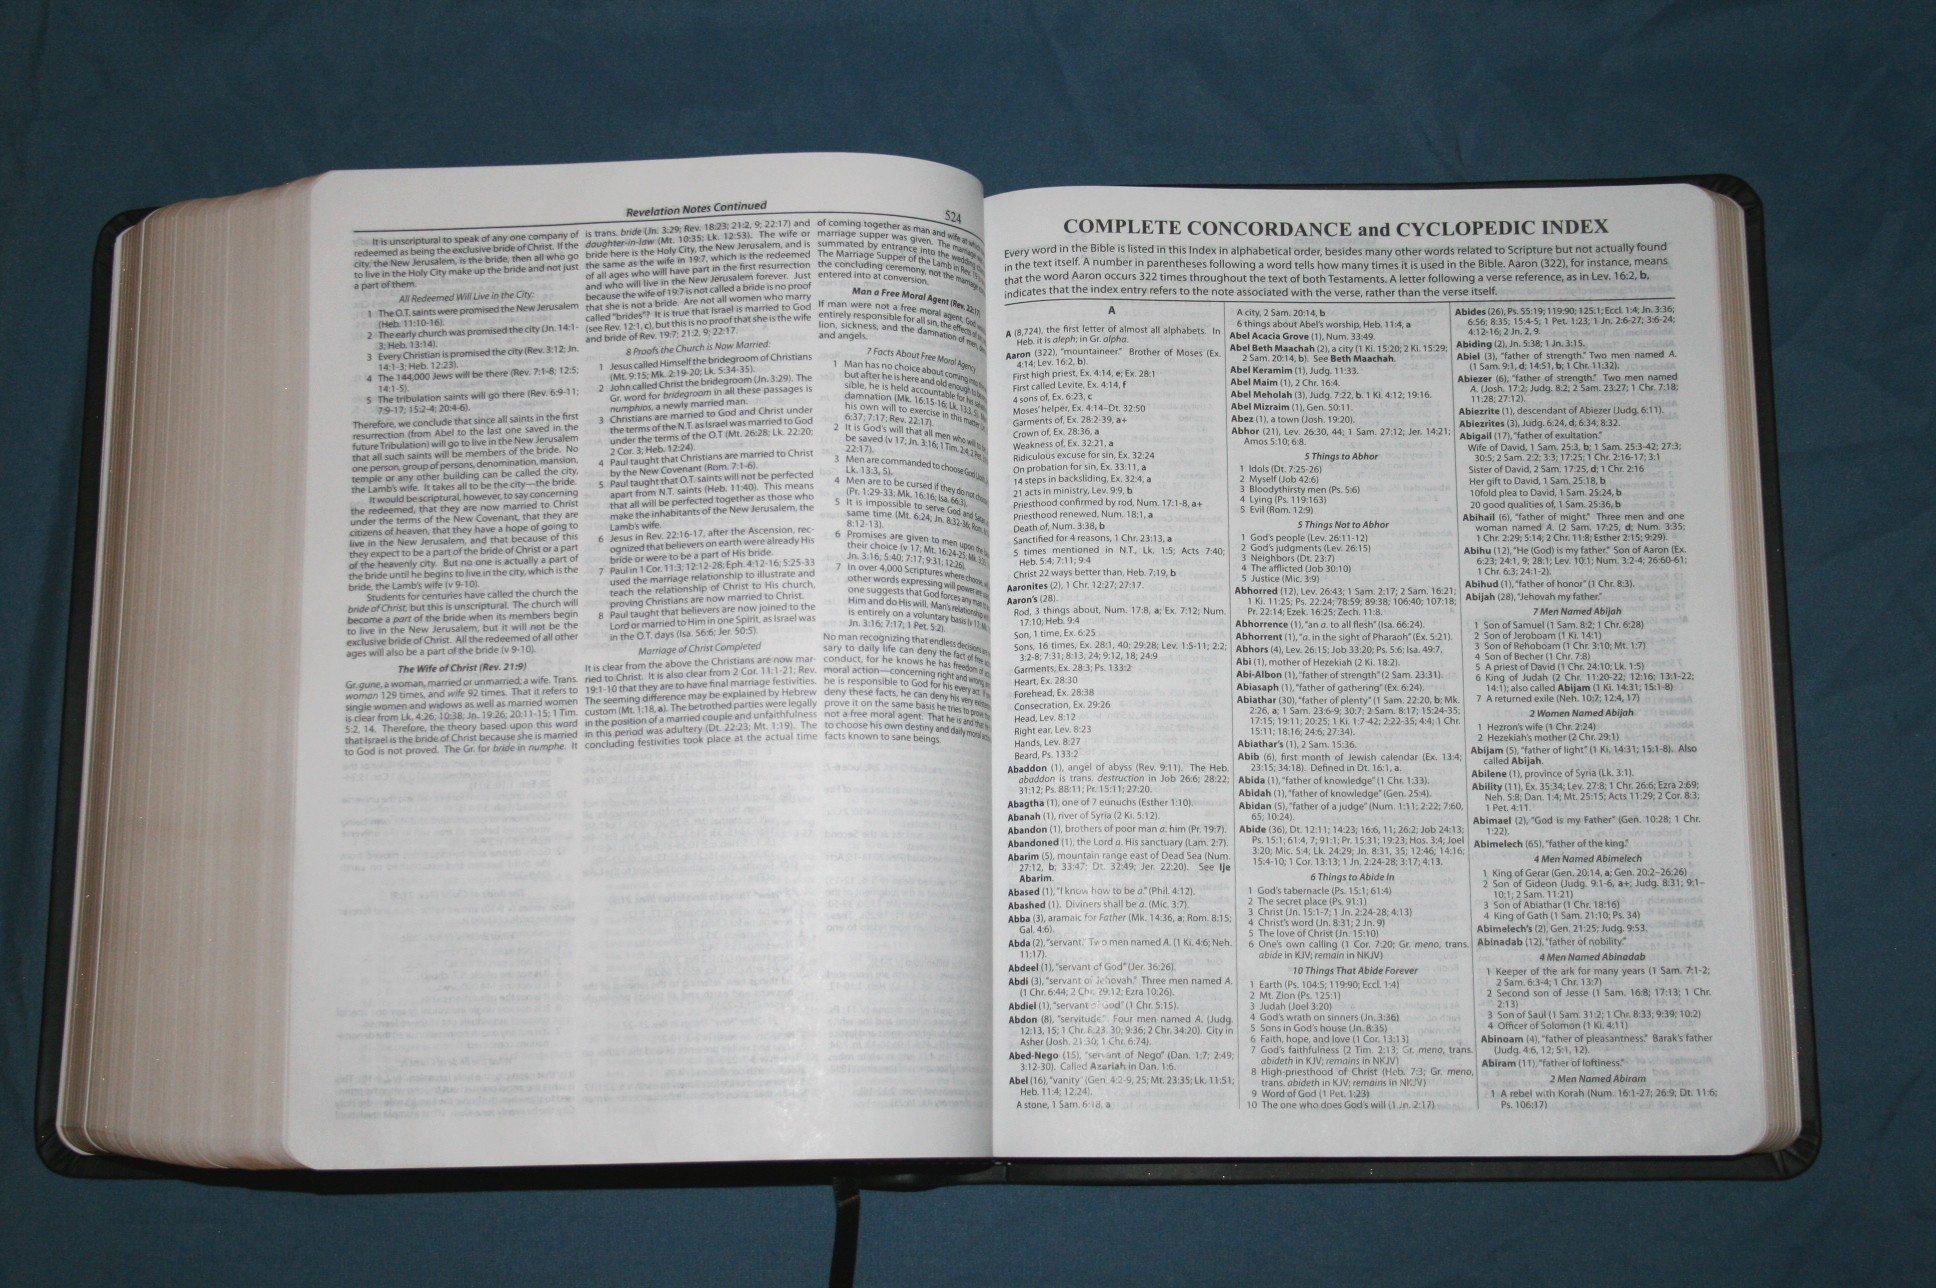 dake annotated reference bible free download full